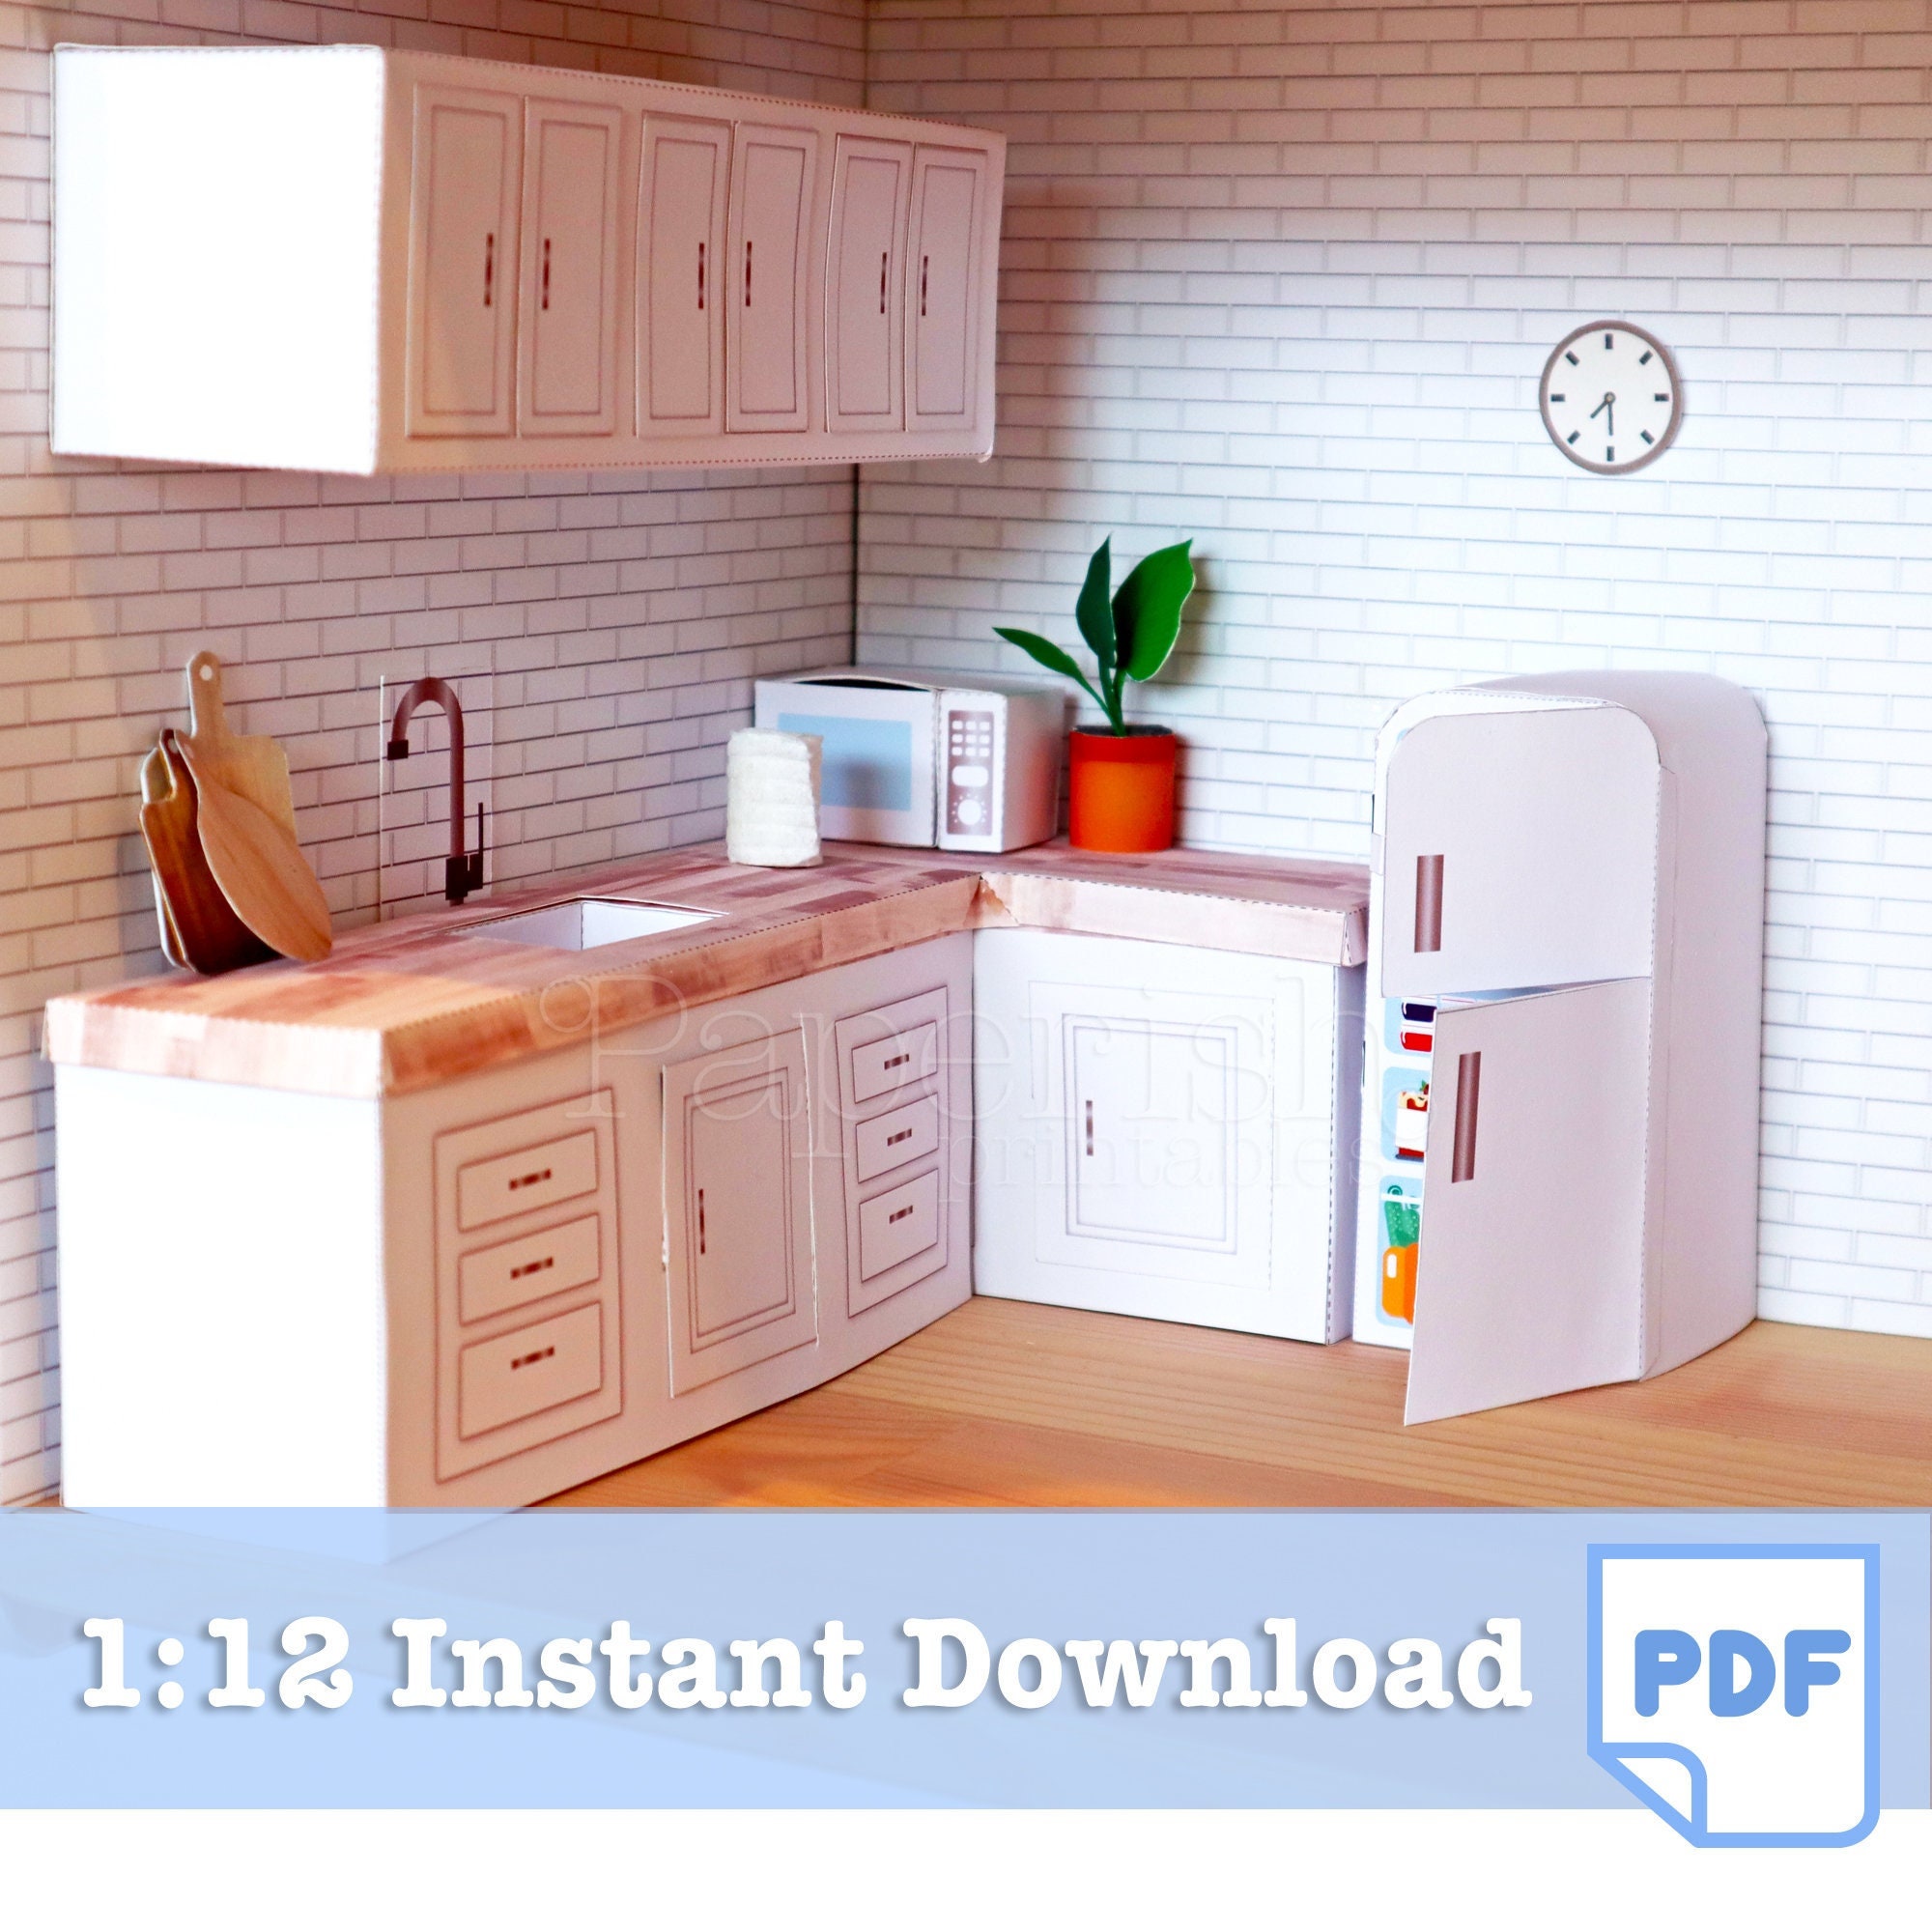 SVG Dollhouse Small Kitchen Microwave / Dollhouse DIY Mini Microwave Oven  Cricut Cut File Instant Download -  Israel